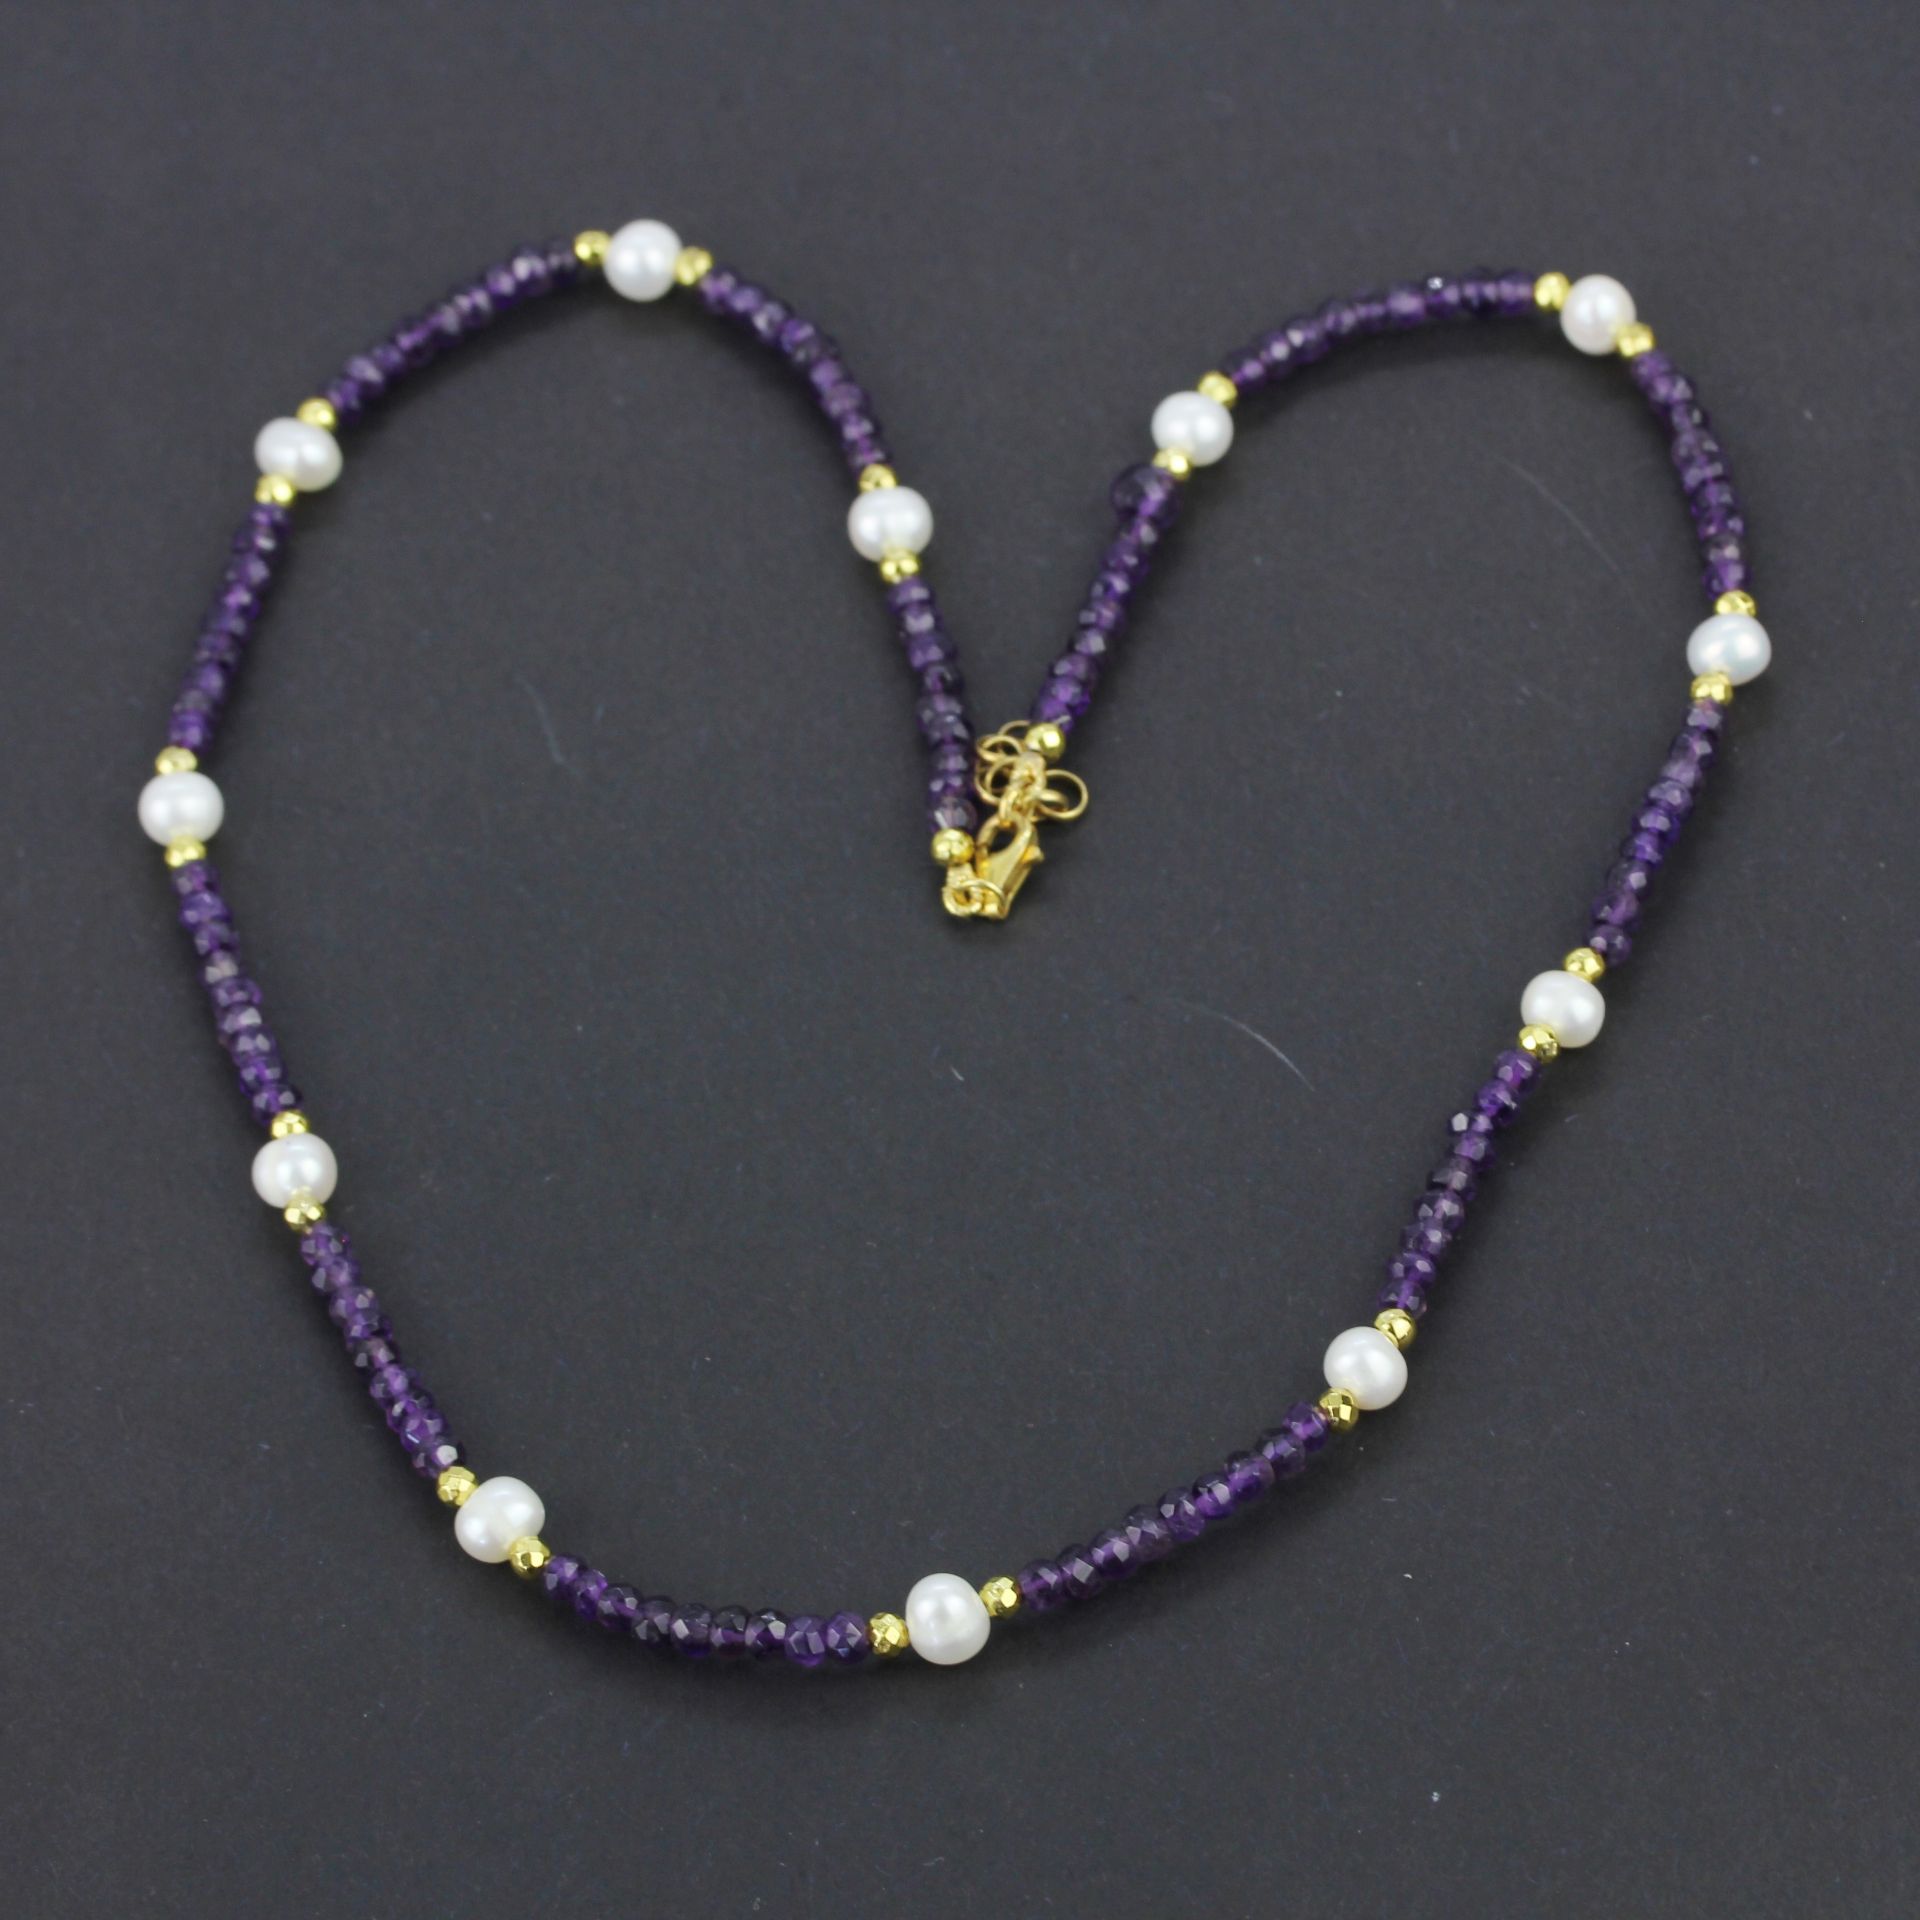 A gold on 925 silver amethyst bead and pearl set necklace, L. 44cm. - Image 2 of 3